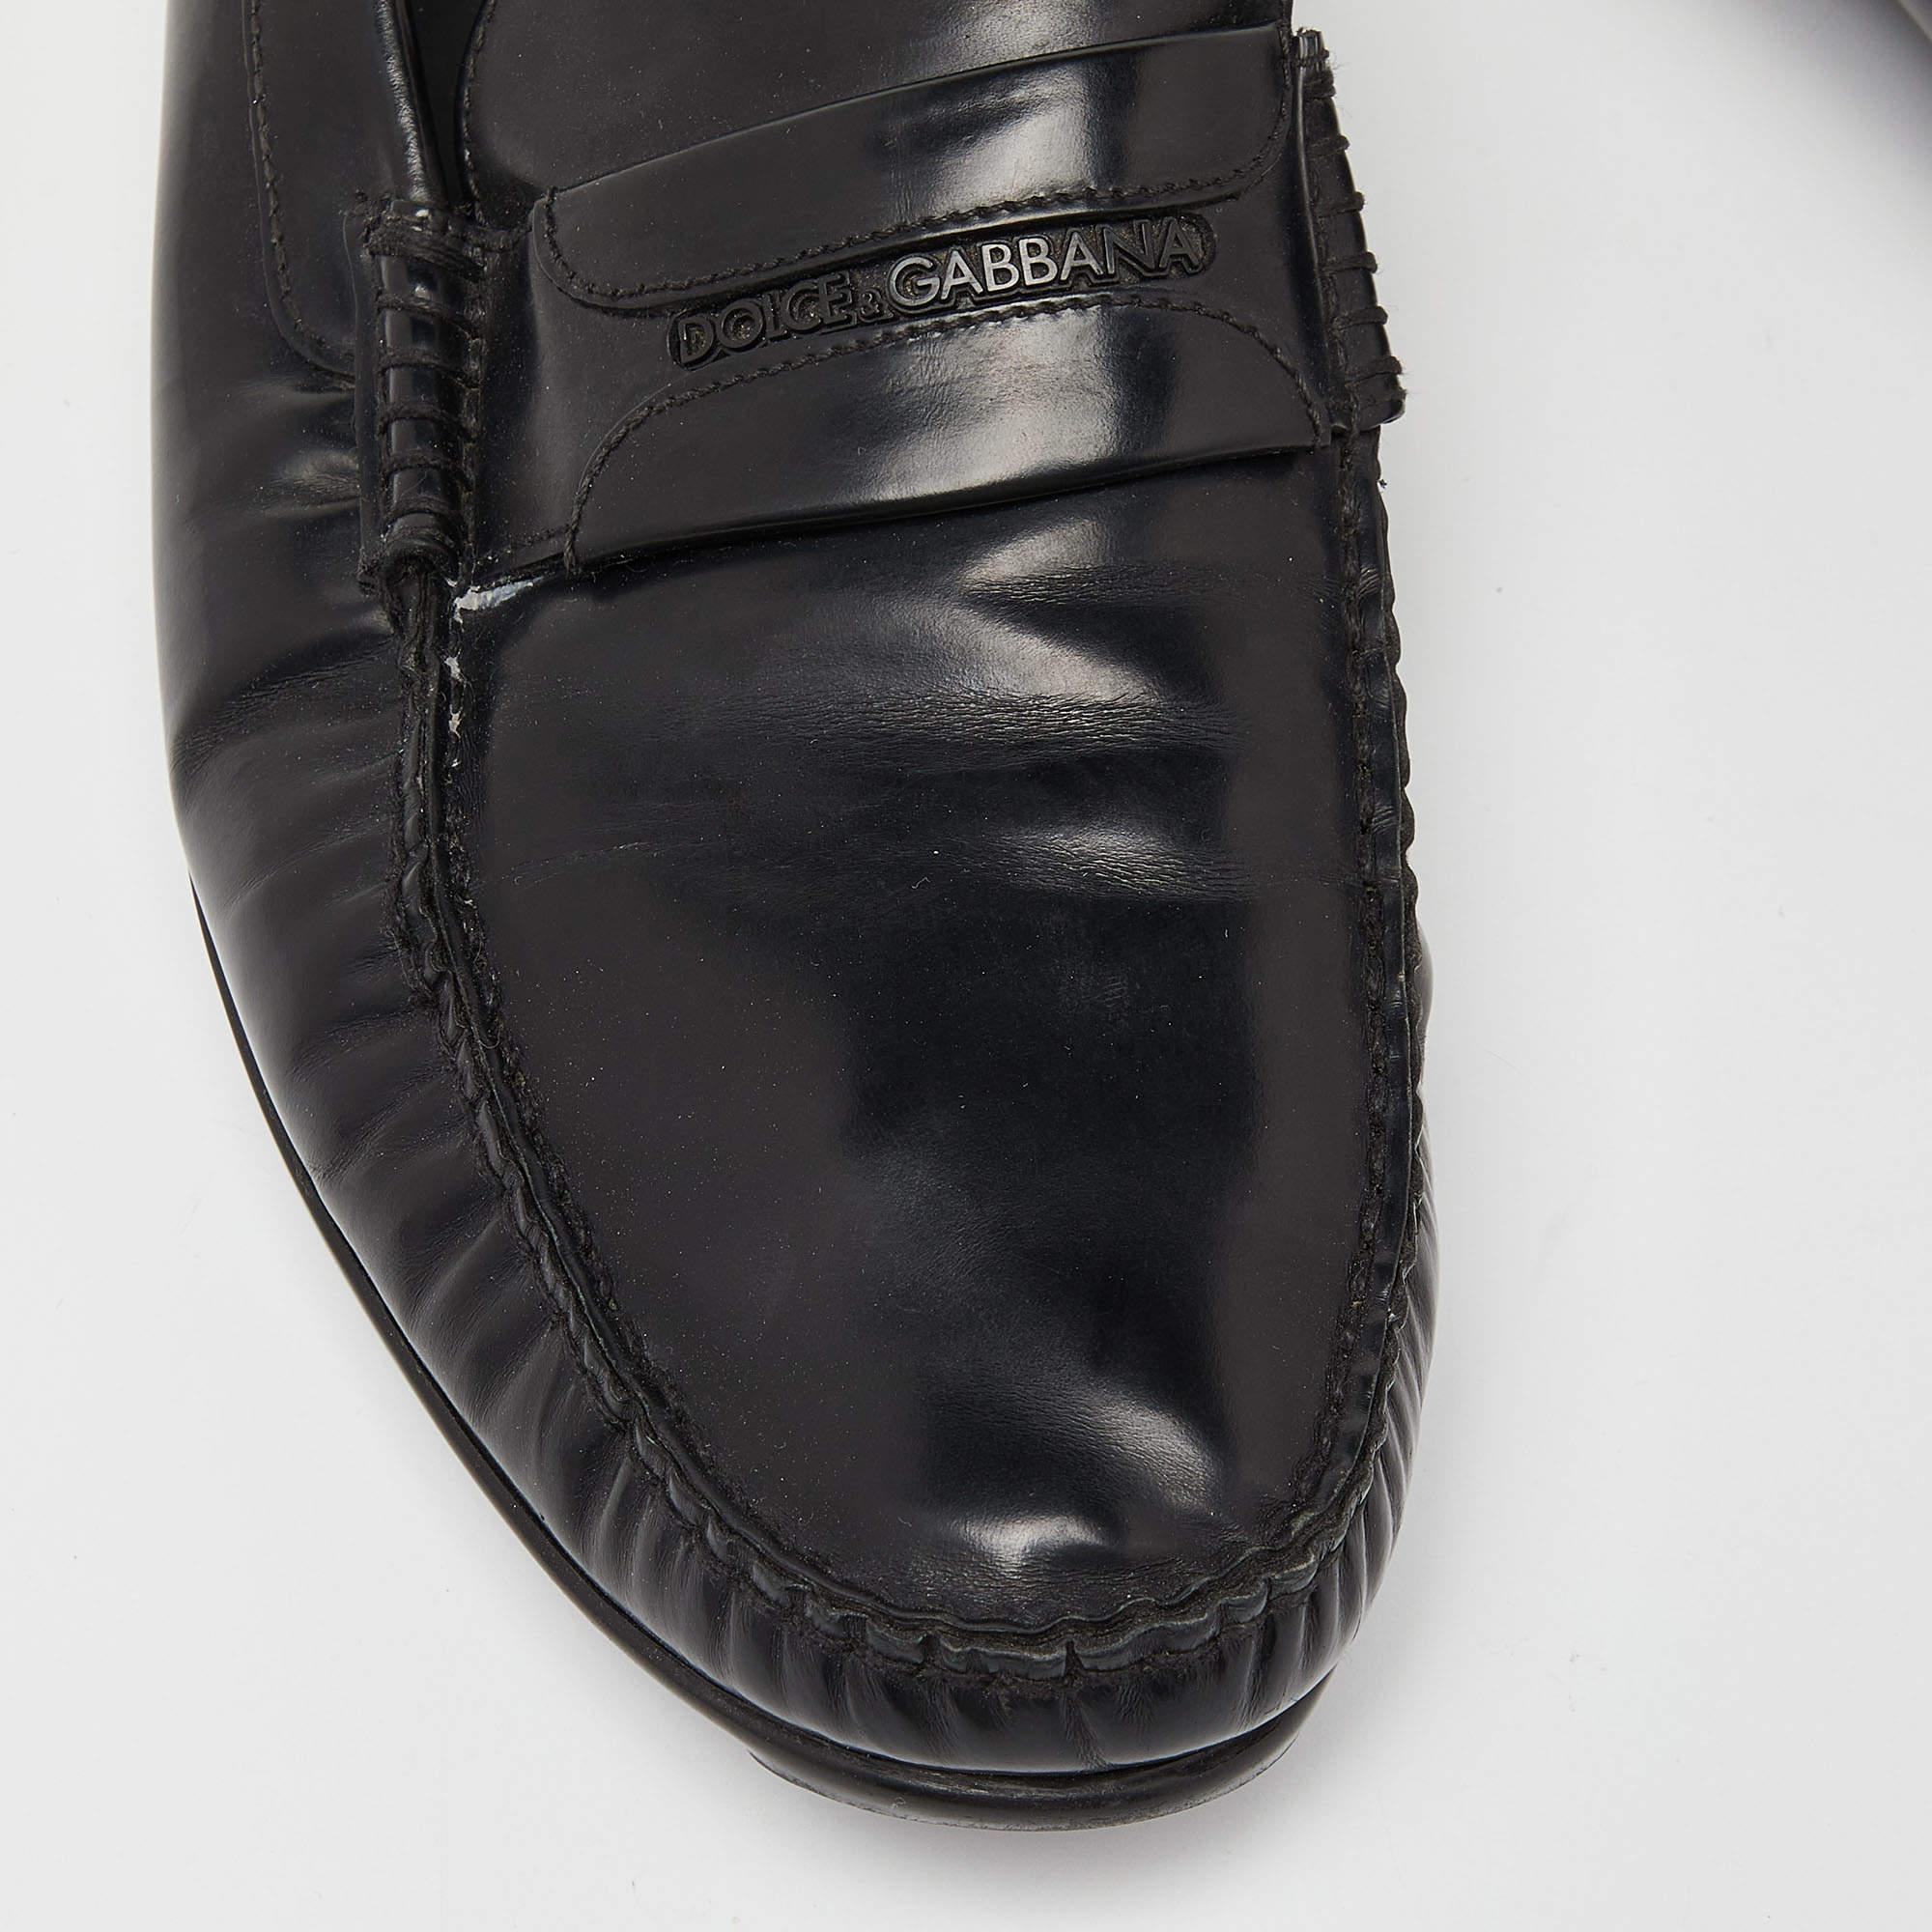 Dolce & Gabbana Black Leather Slip On Loafers Size 44.5 For Sale 2